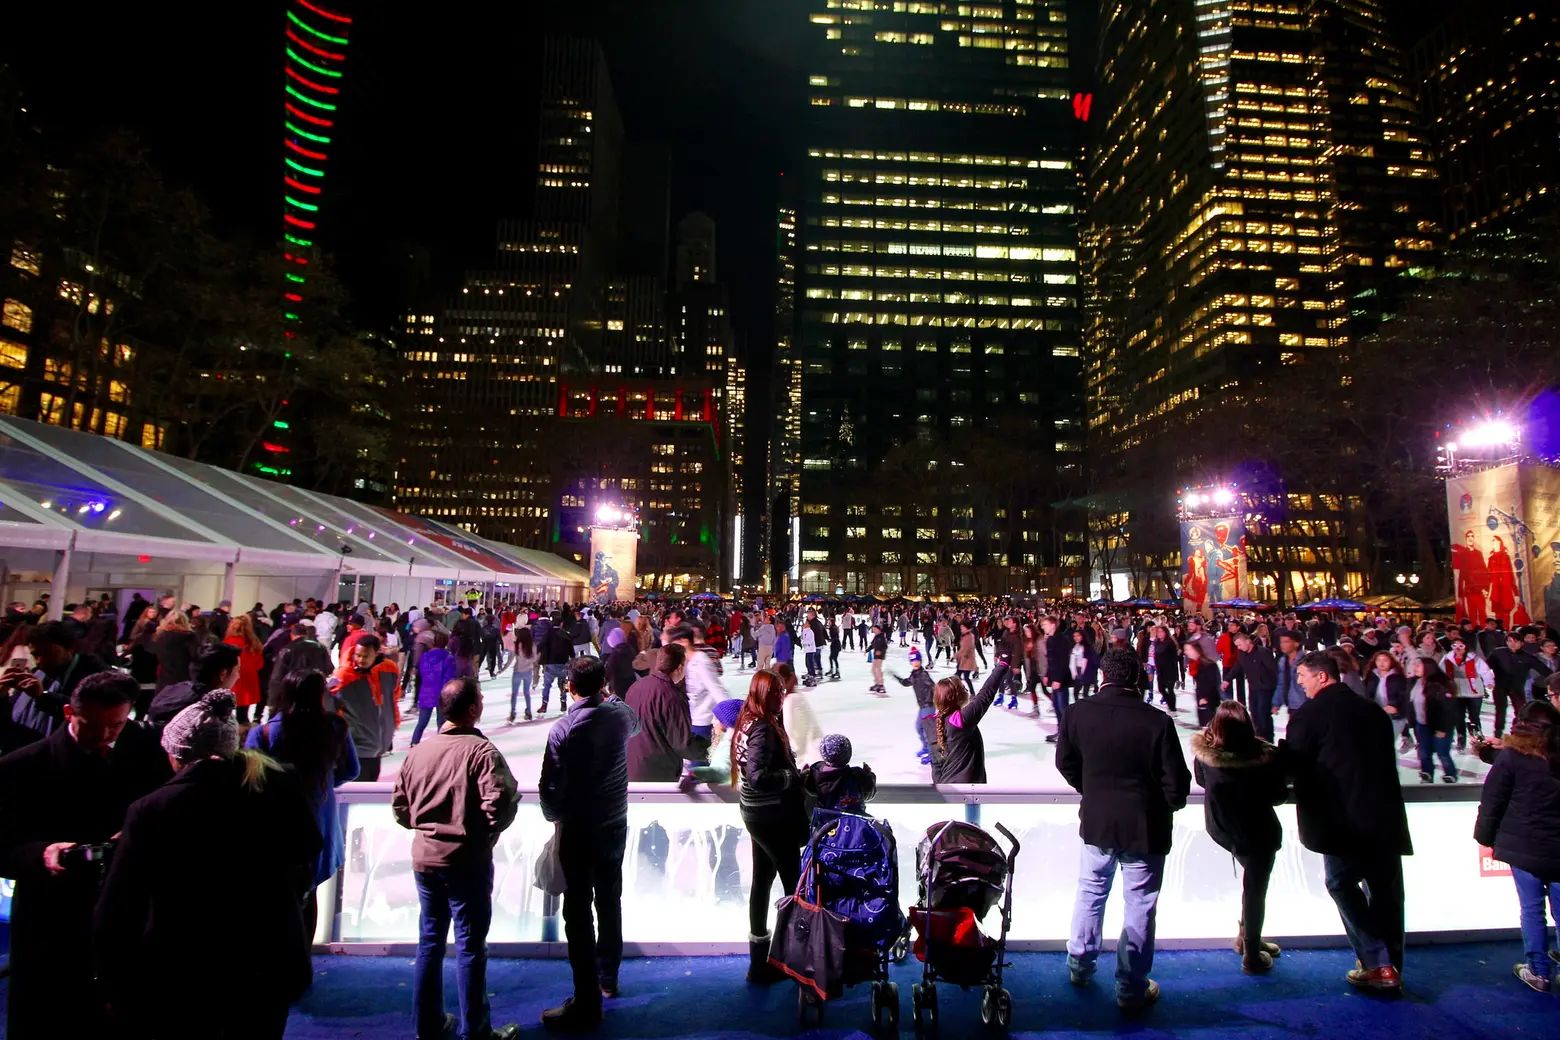 Winter festivities come early to NYC, with ice rinks and holiday markets opening this month